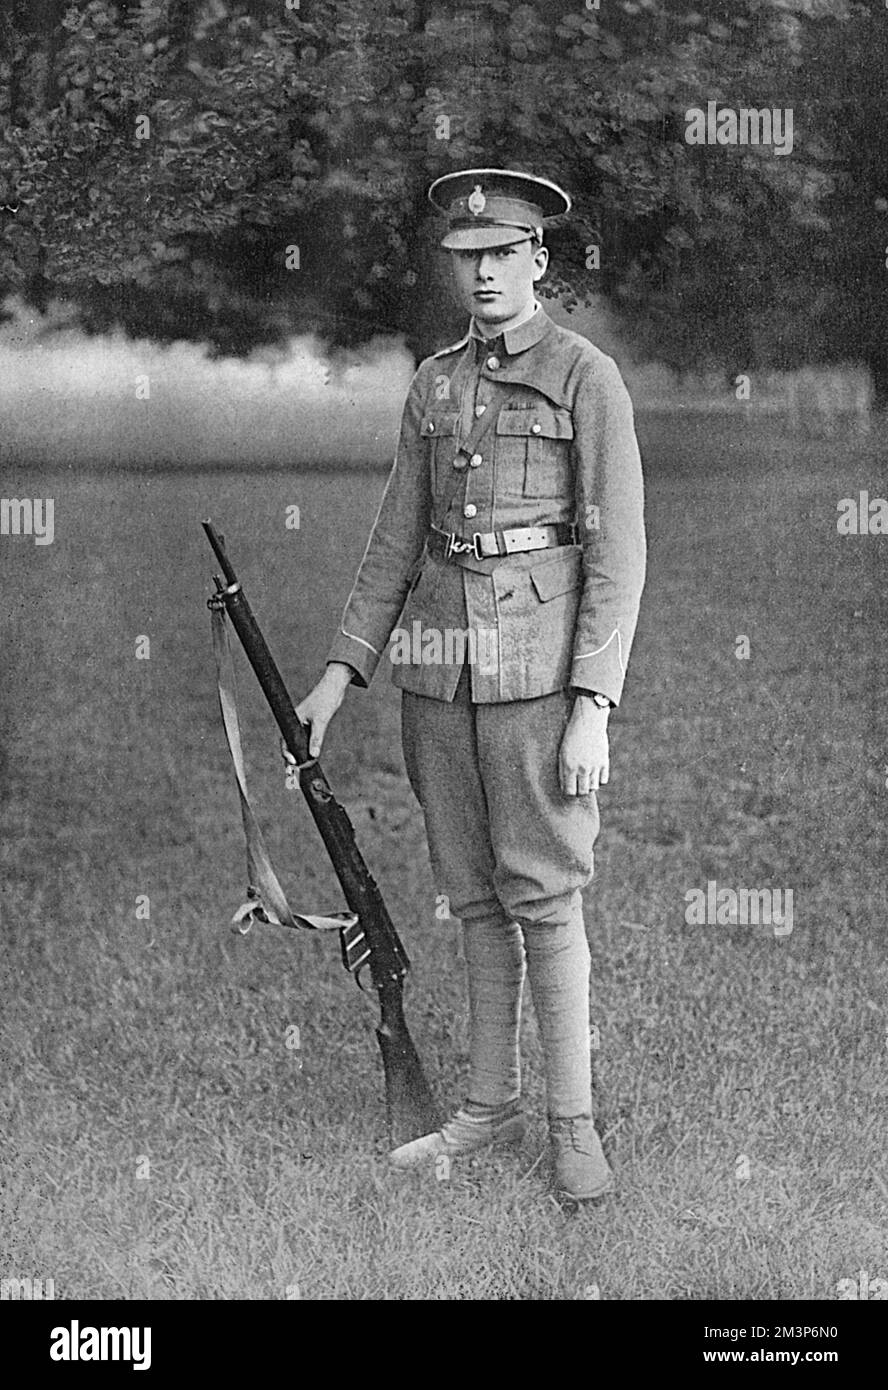 Prince Henry, later Duke of Gloucester (1900 - 1974), third son of King George V and Queen Mary, pictured as a private in the Eton College Officers Training Corps, where he was at camp at Tidworth.    1916 Stock Photo